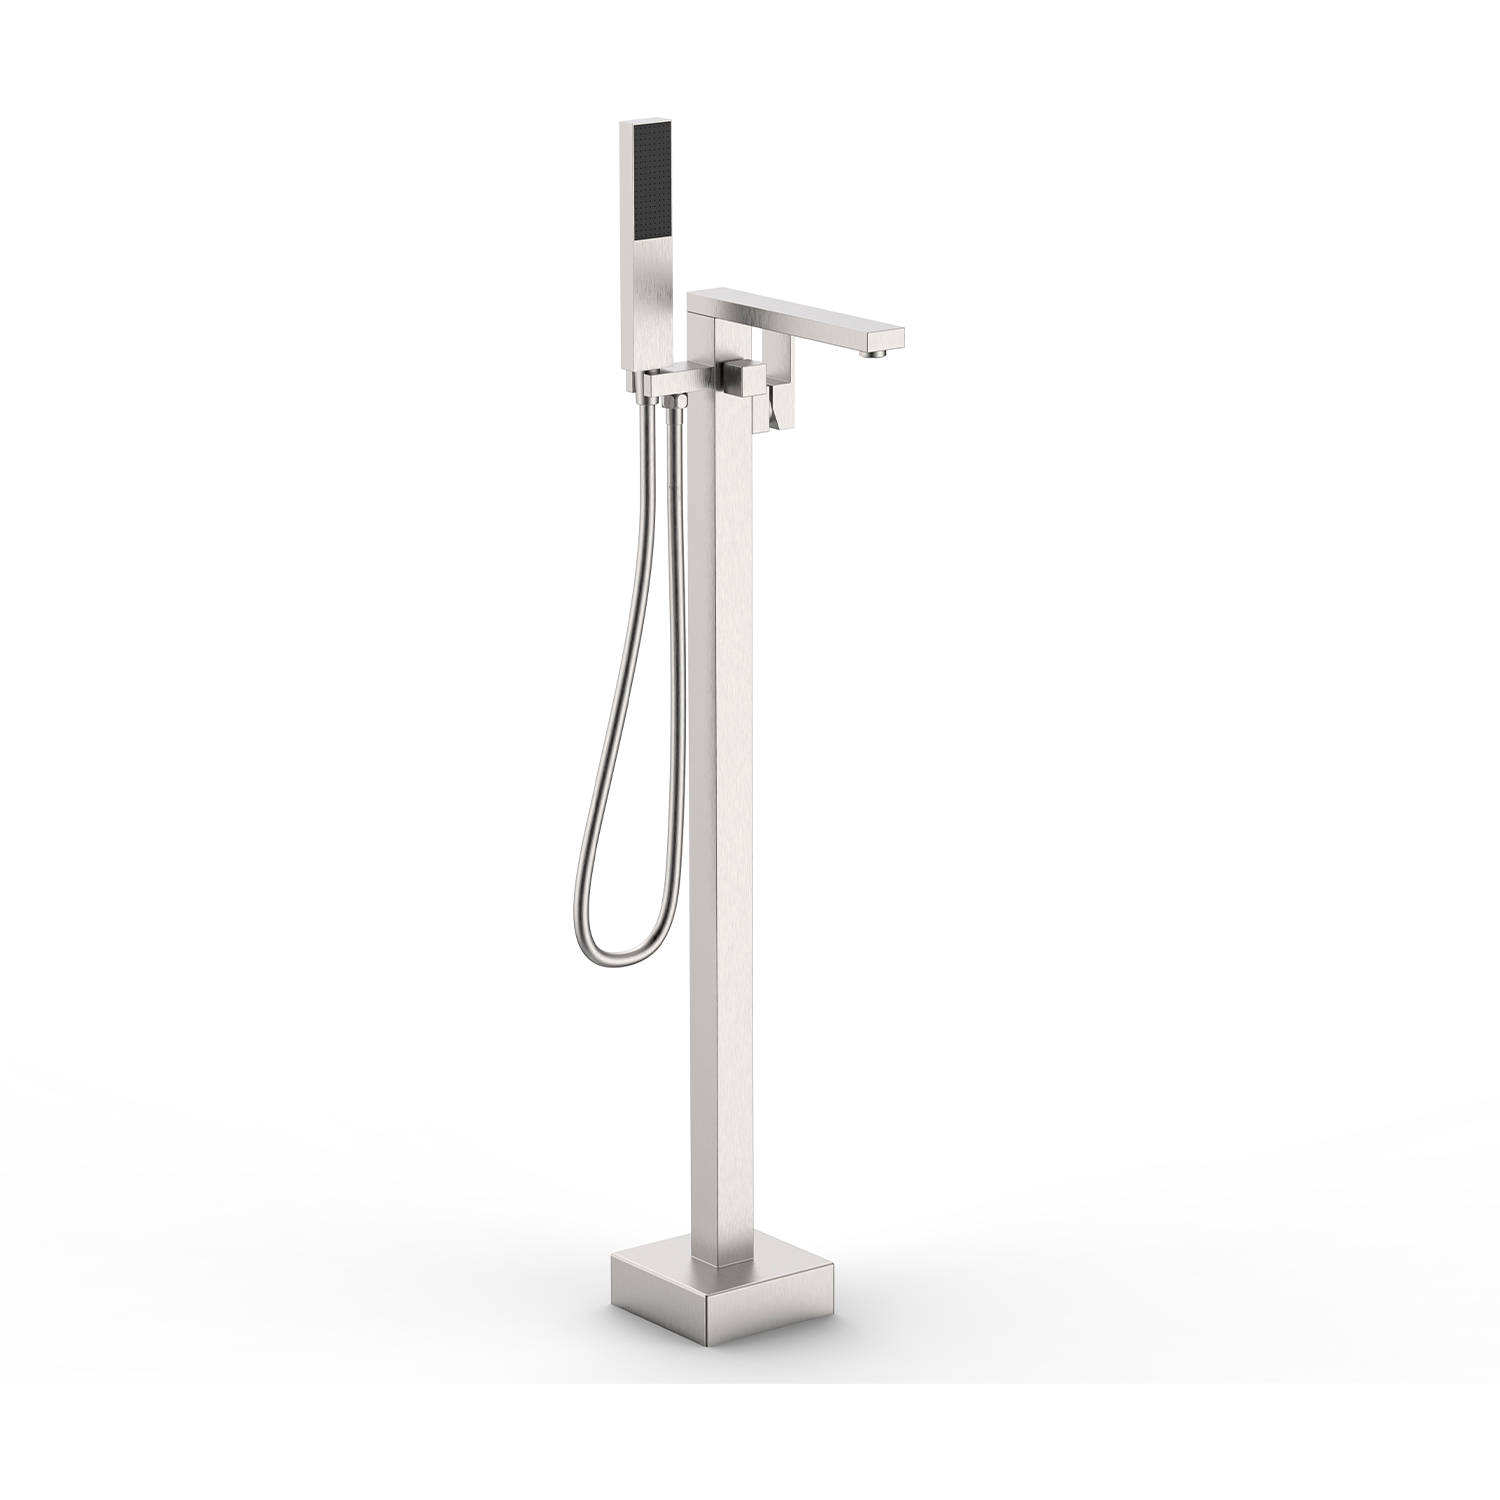 DAX Freestanding Tub Filler with Hand Shower and Square Spout Brushed Nickel Finish (DAX-8833-BN)